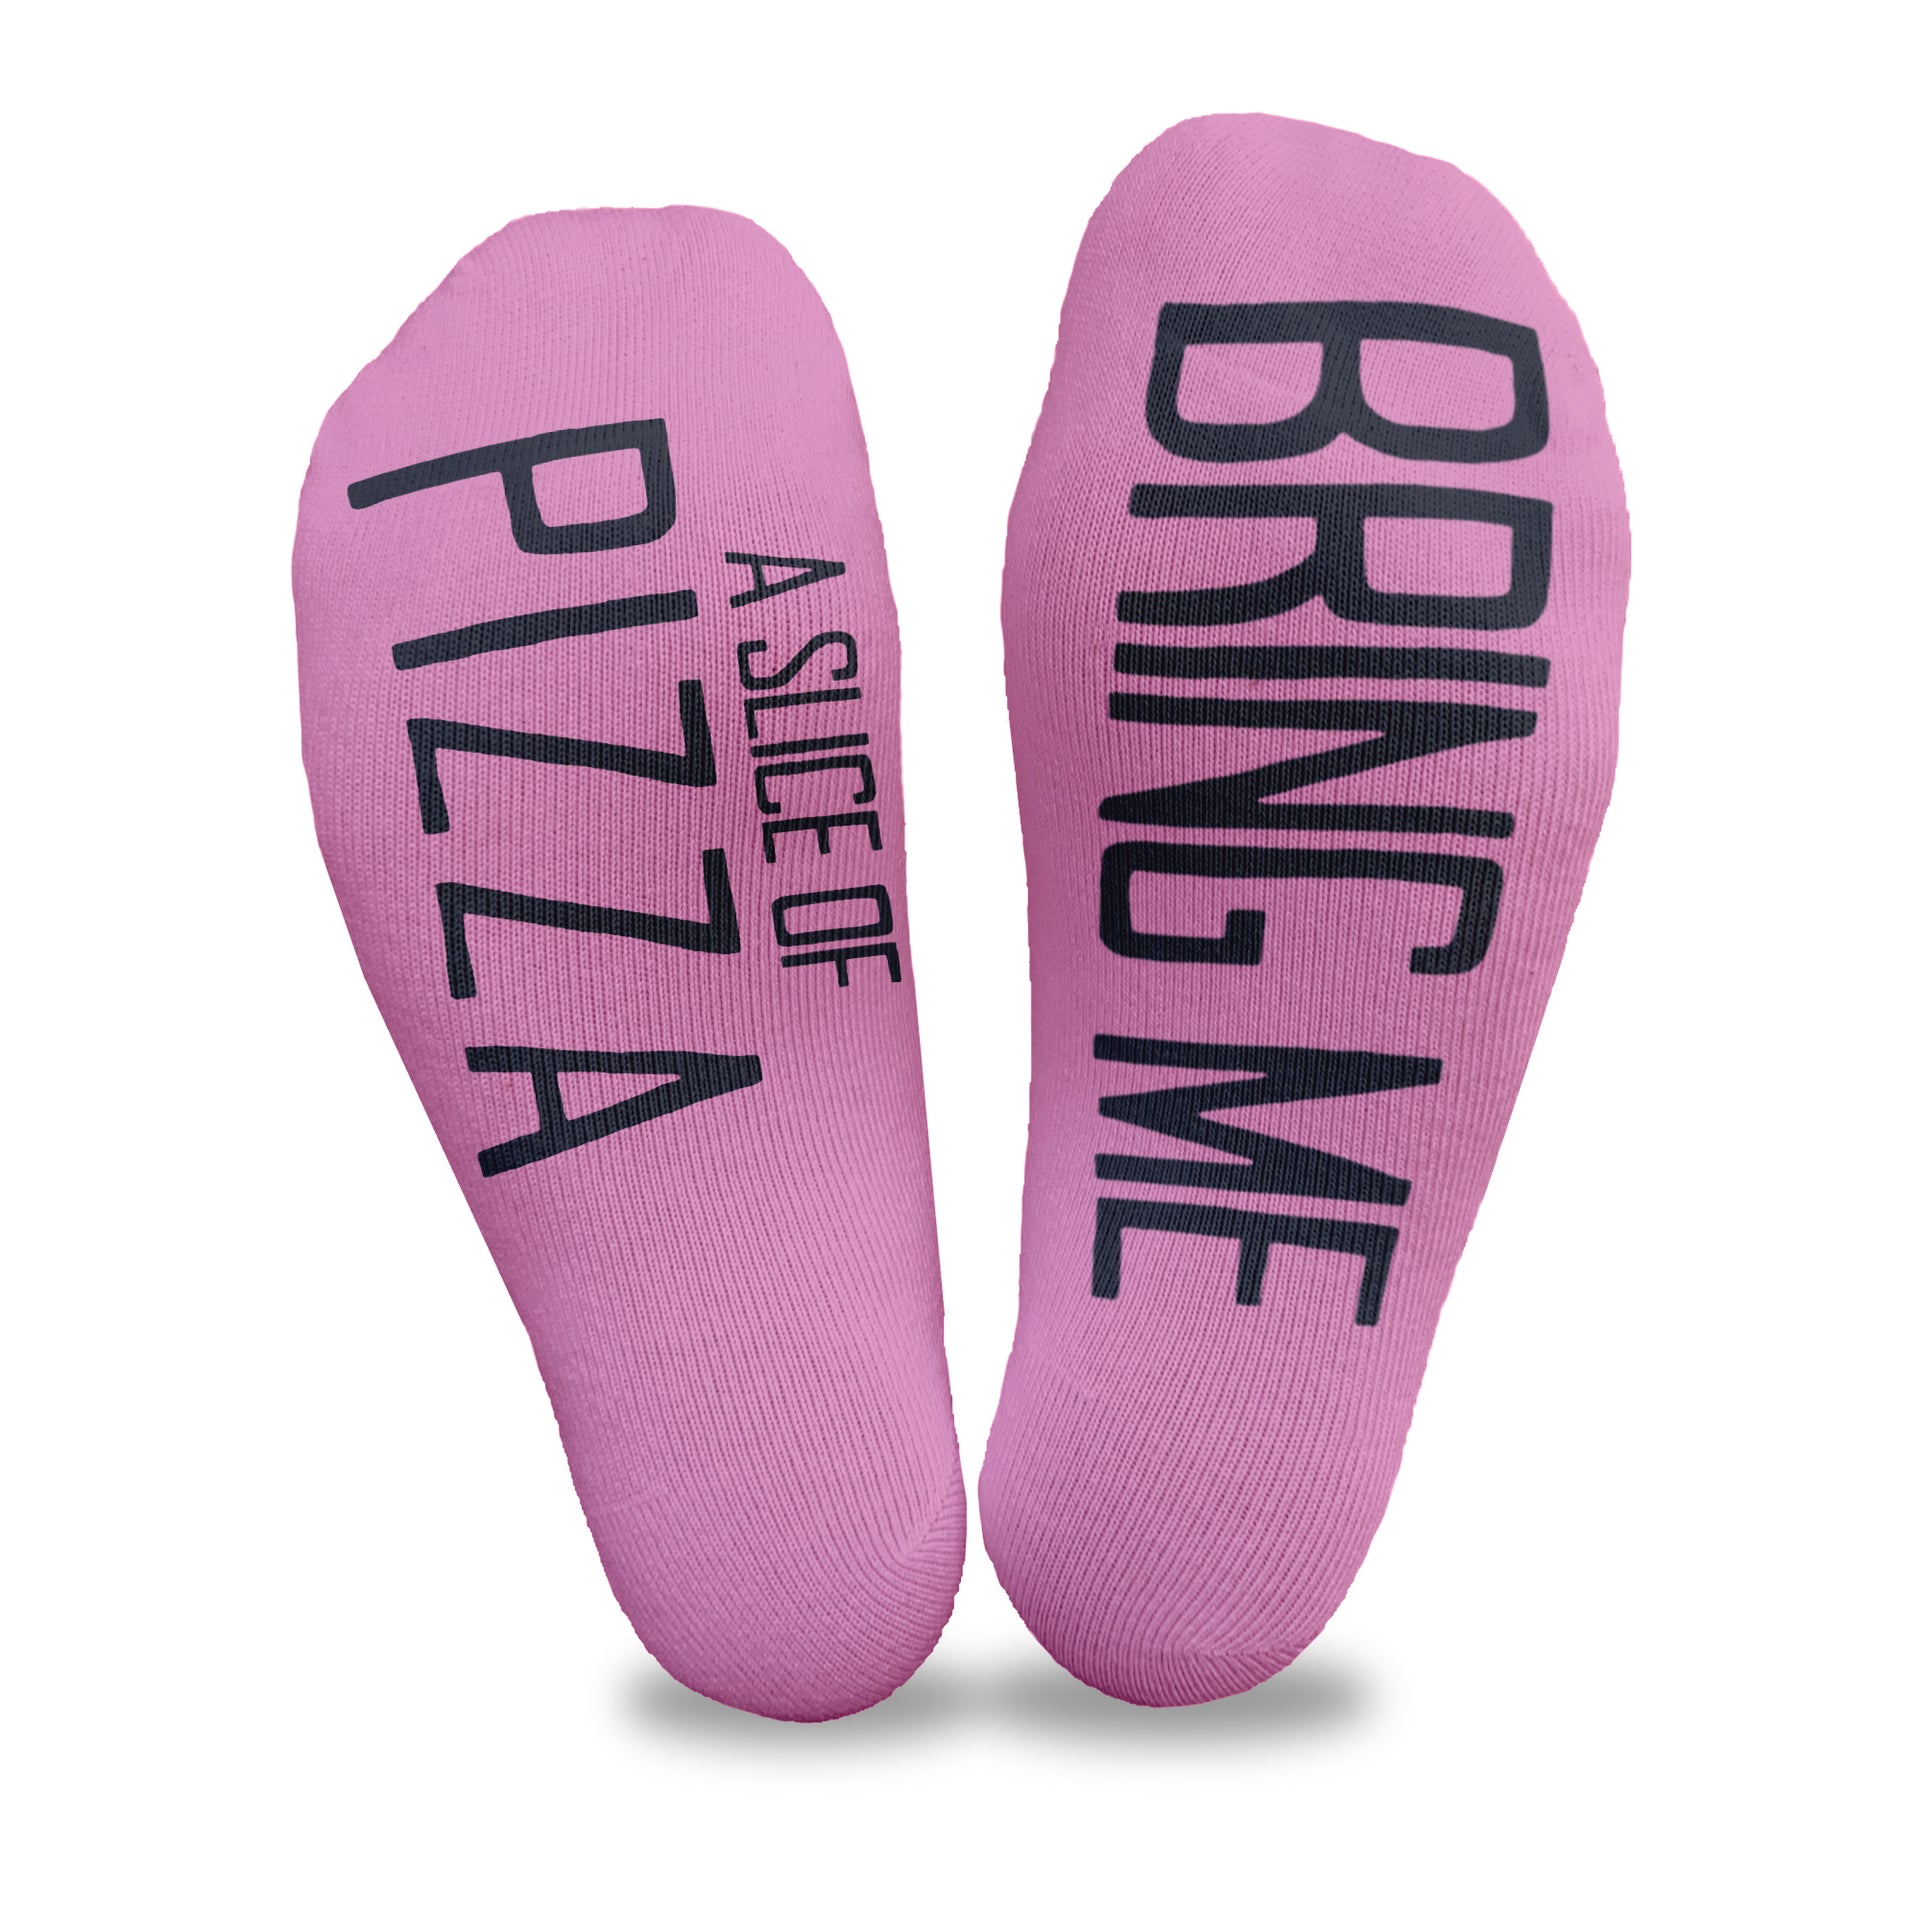 Bring me a slice of pizza custom printed in black ink on the bottom soles of fuchsia cotton no show socks makes a great way to get some pizza!